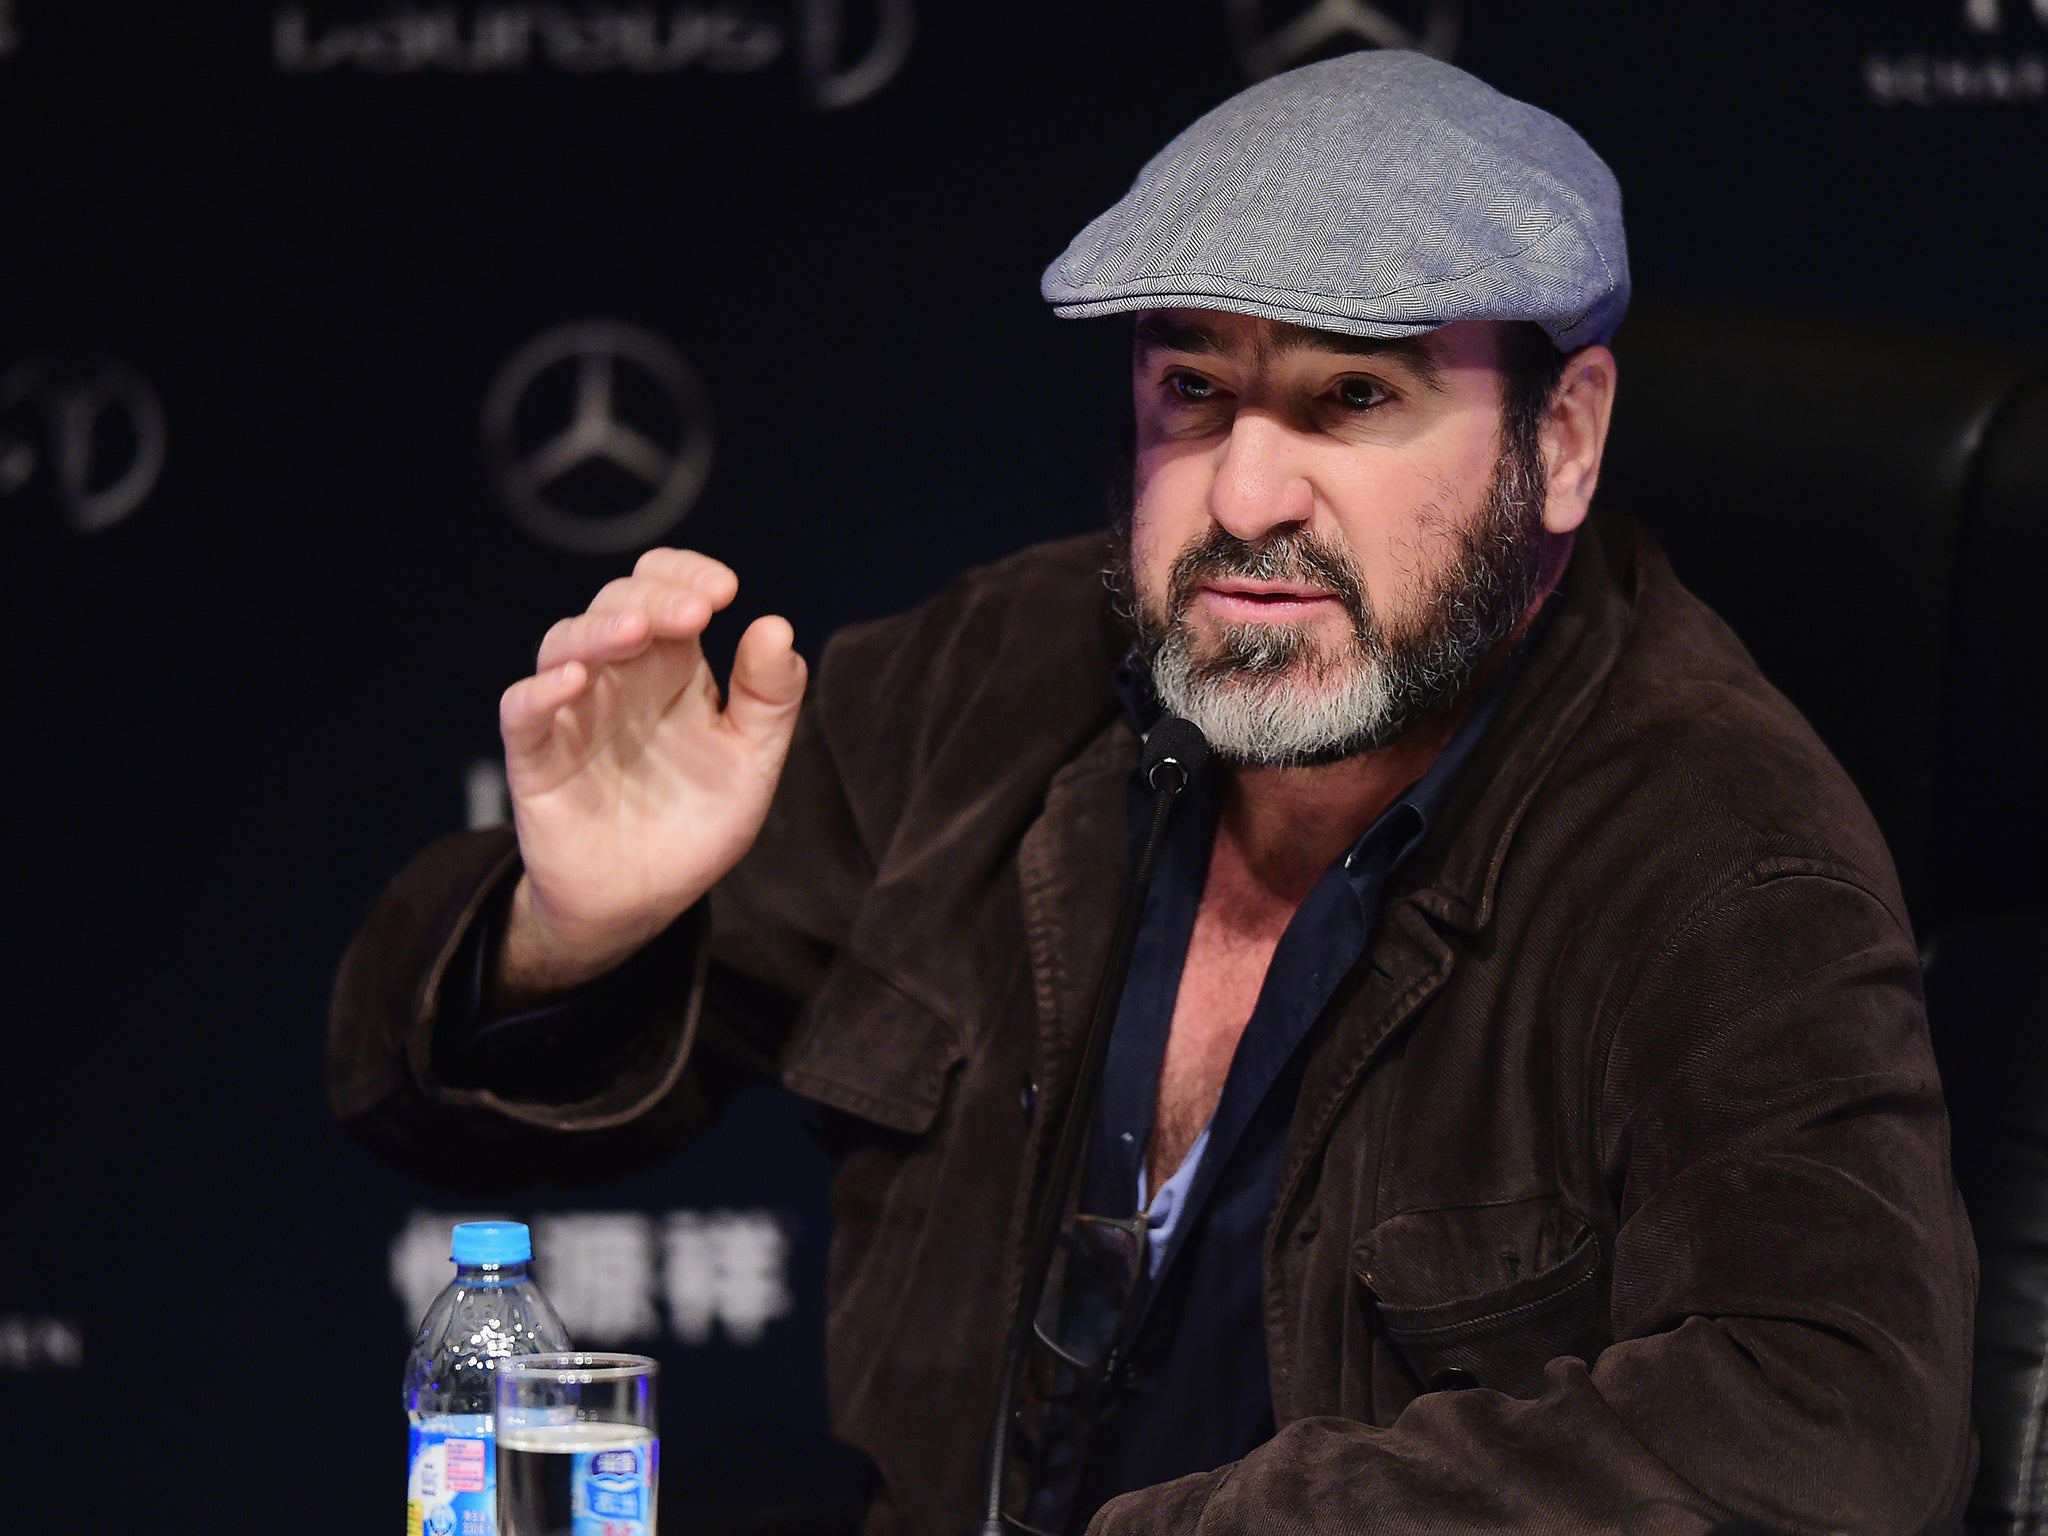 Eric Cantona speaks during a press conference at the Shanghai Grand Theatre prior to the Laureus World Sports Awards